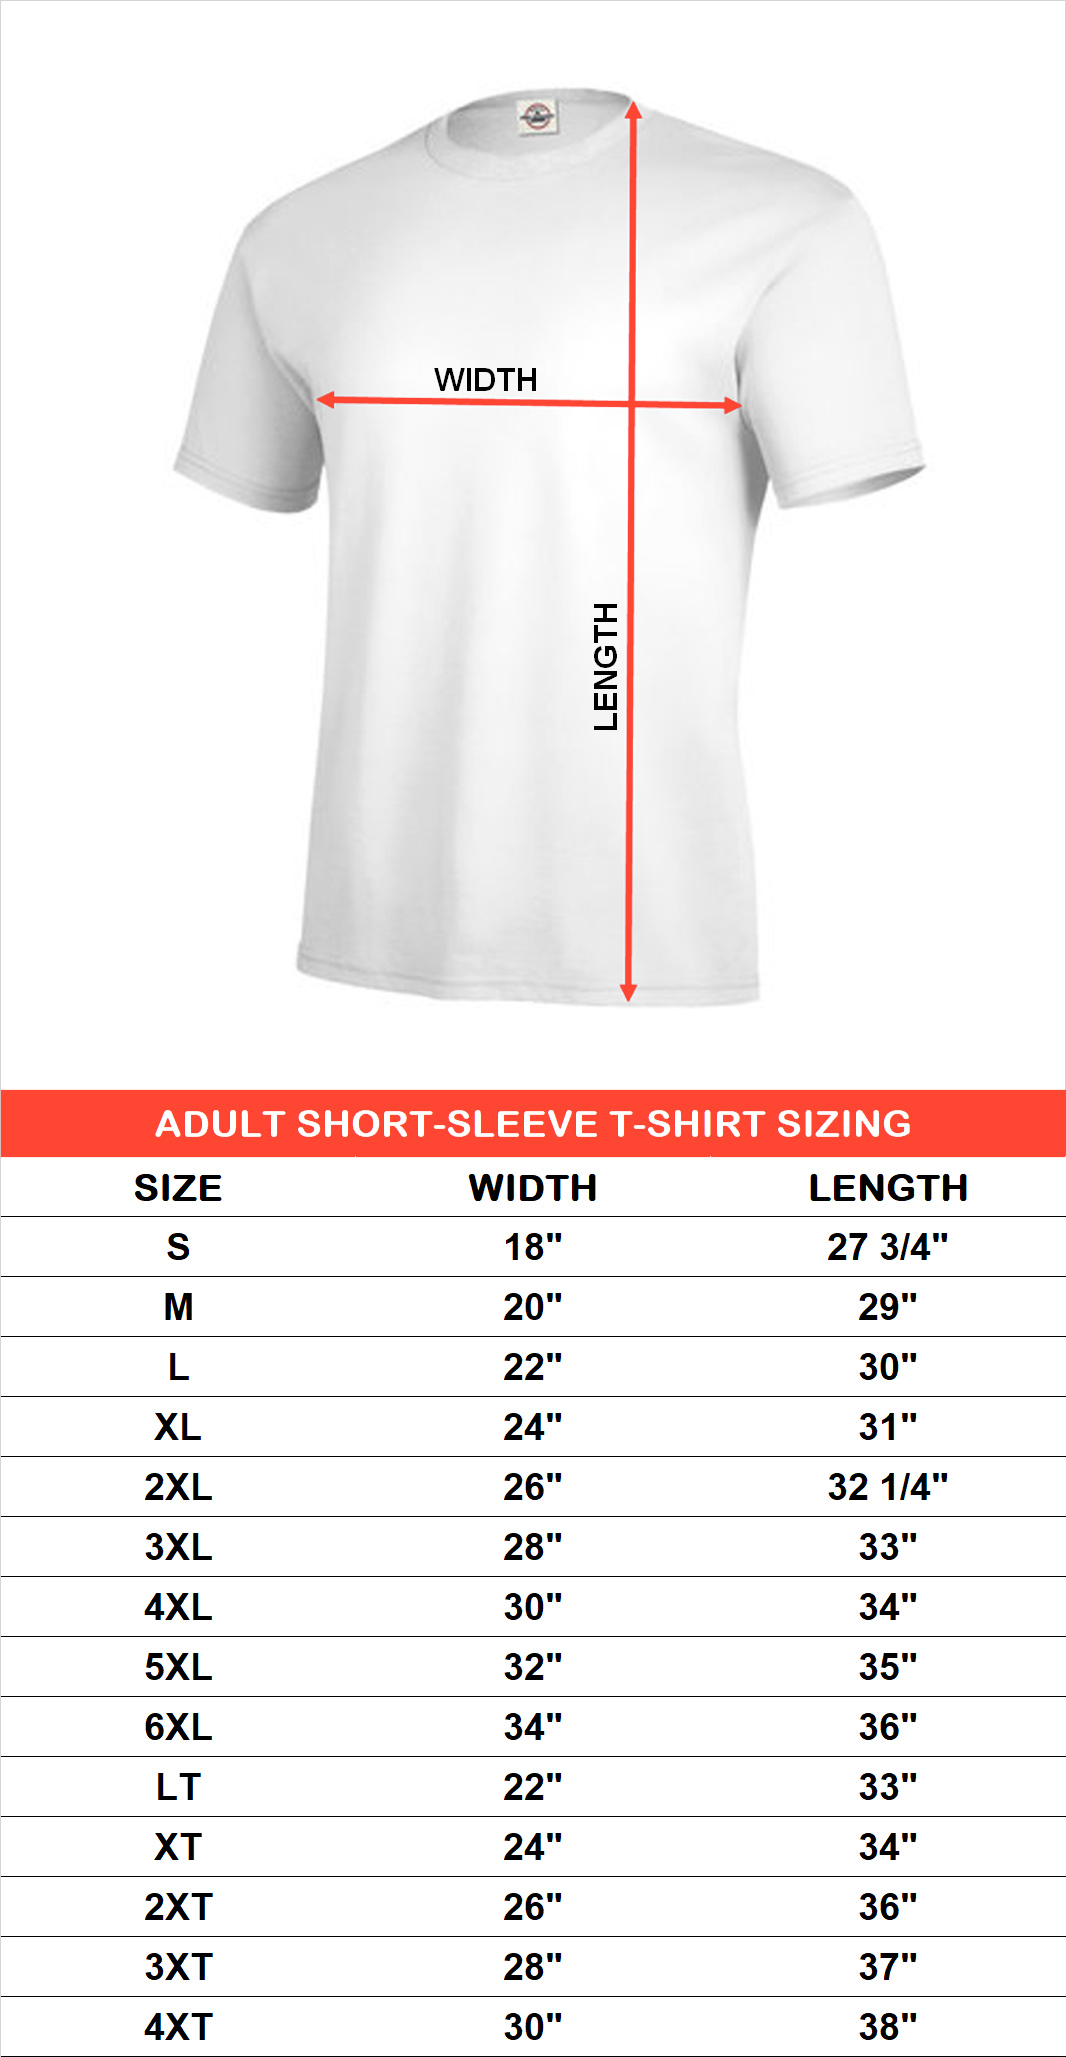 Sizing chart for the Rambo Bow Pull t-shirt RAM571